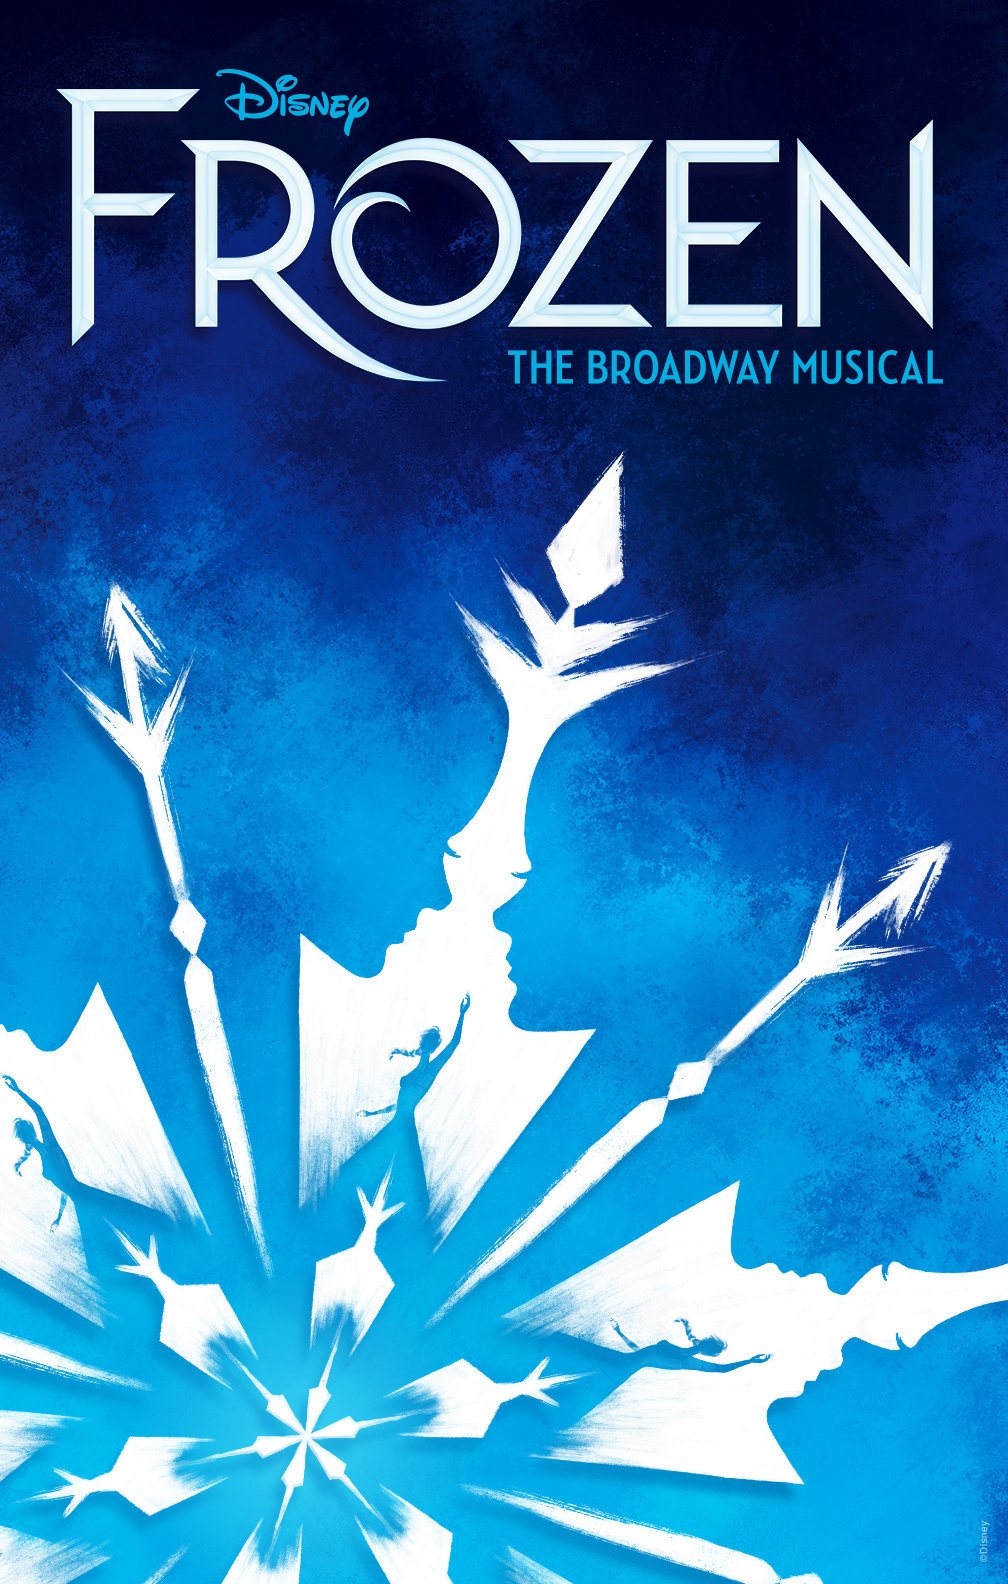 Check Out the Poster and Official Trailer for Frozen The Broadway Musical